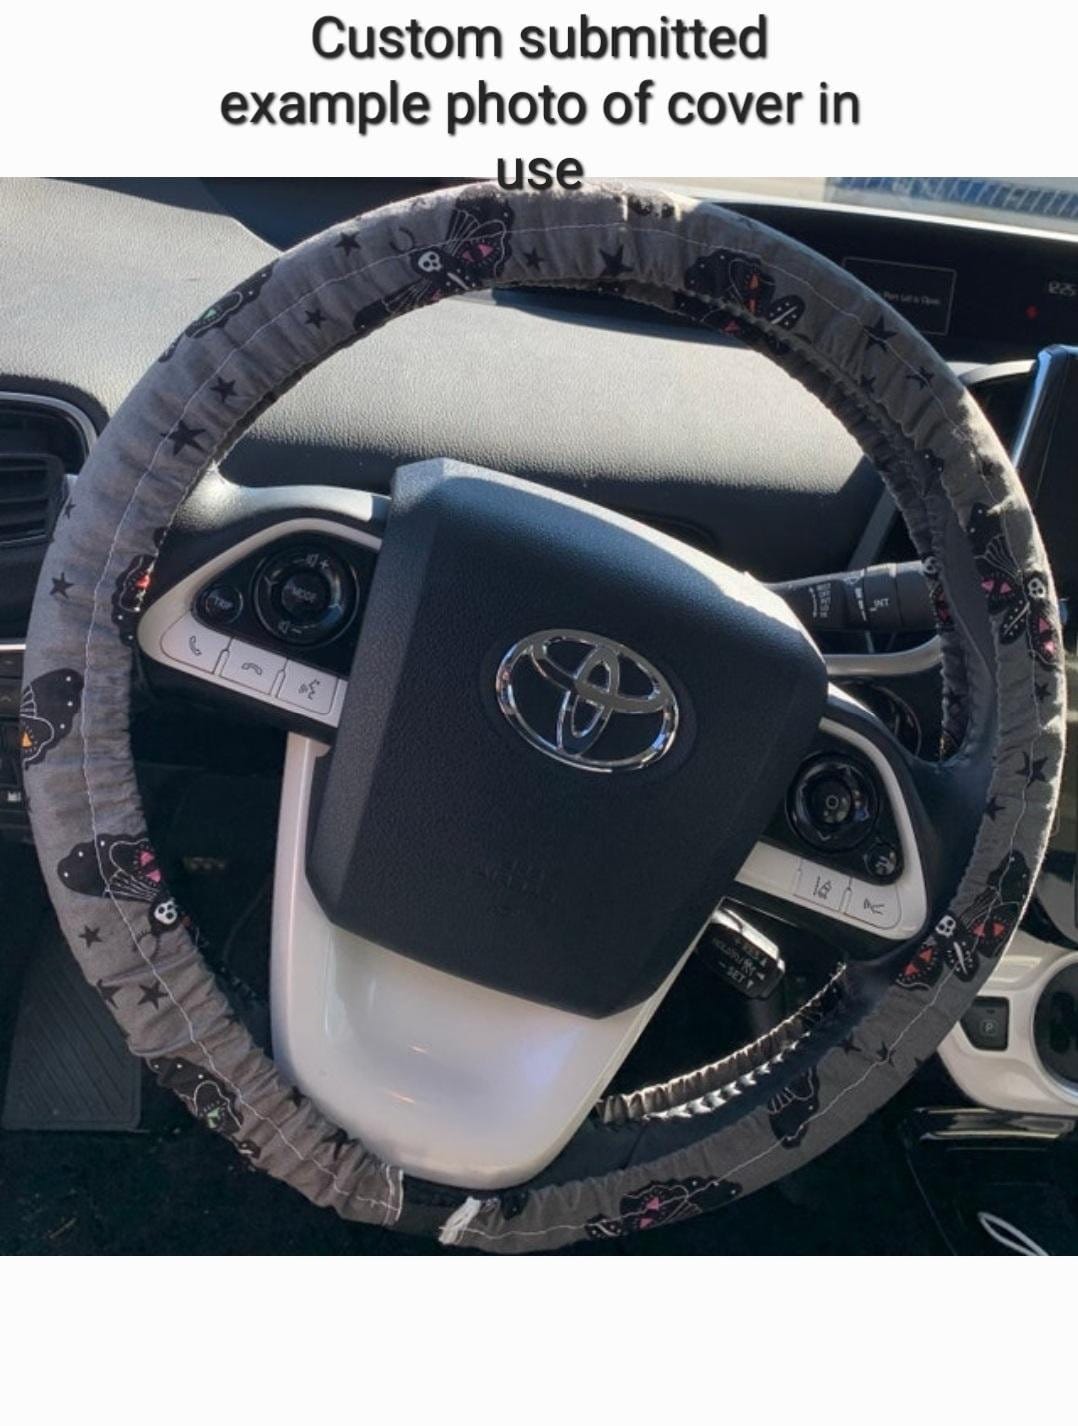 Mouse Words Steering Wheel Cover made with Licensed Disney Fabric - Harlow's Store and Garden Gifts